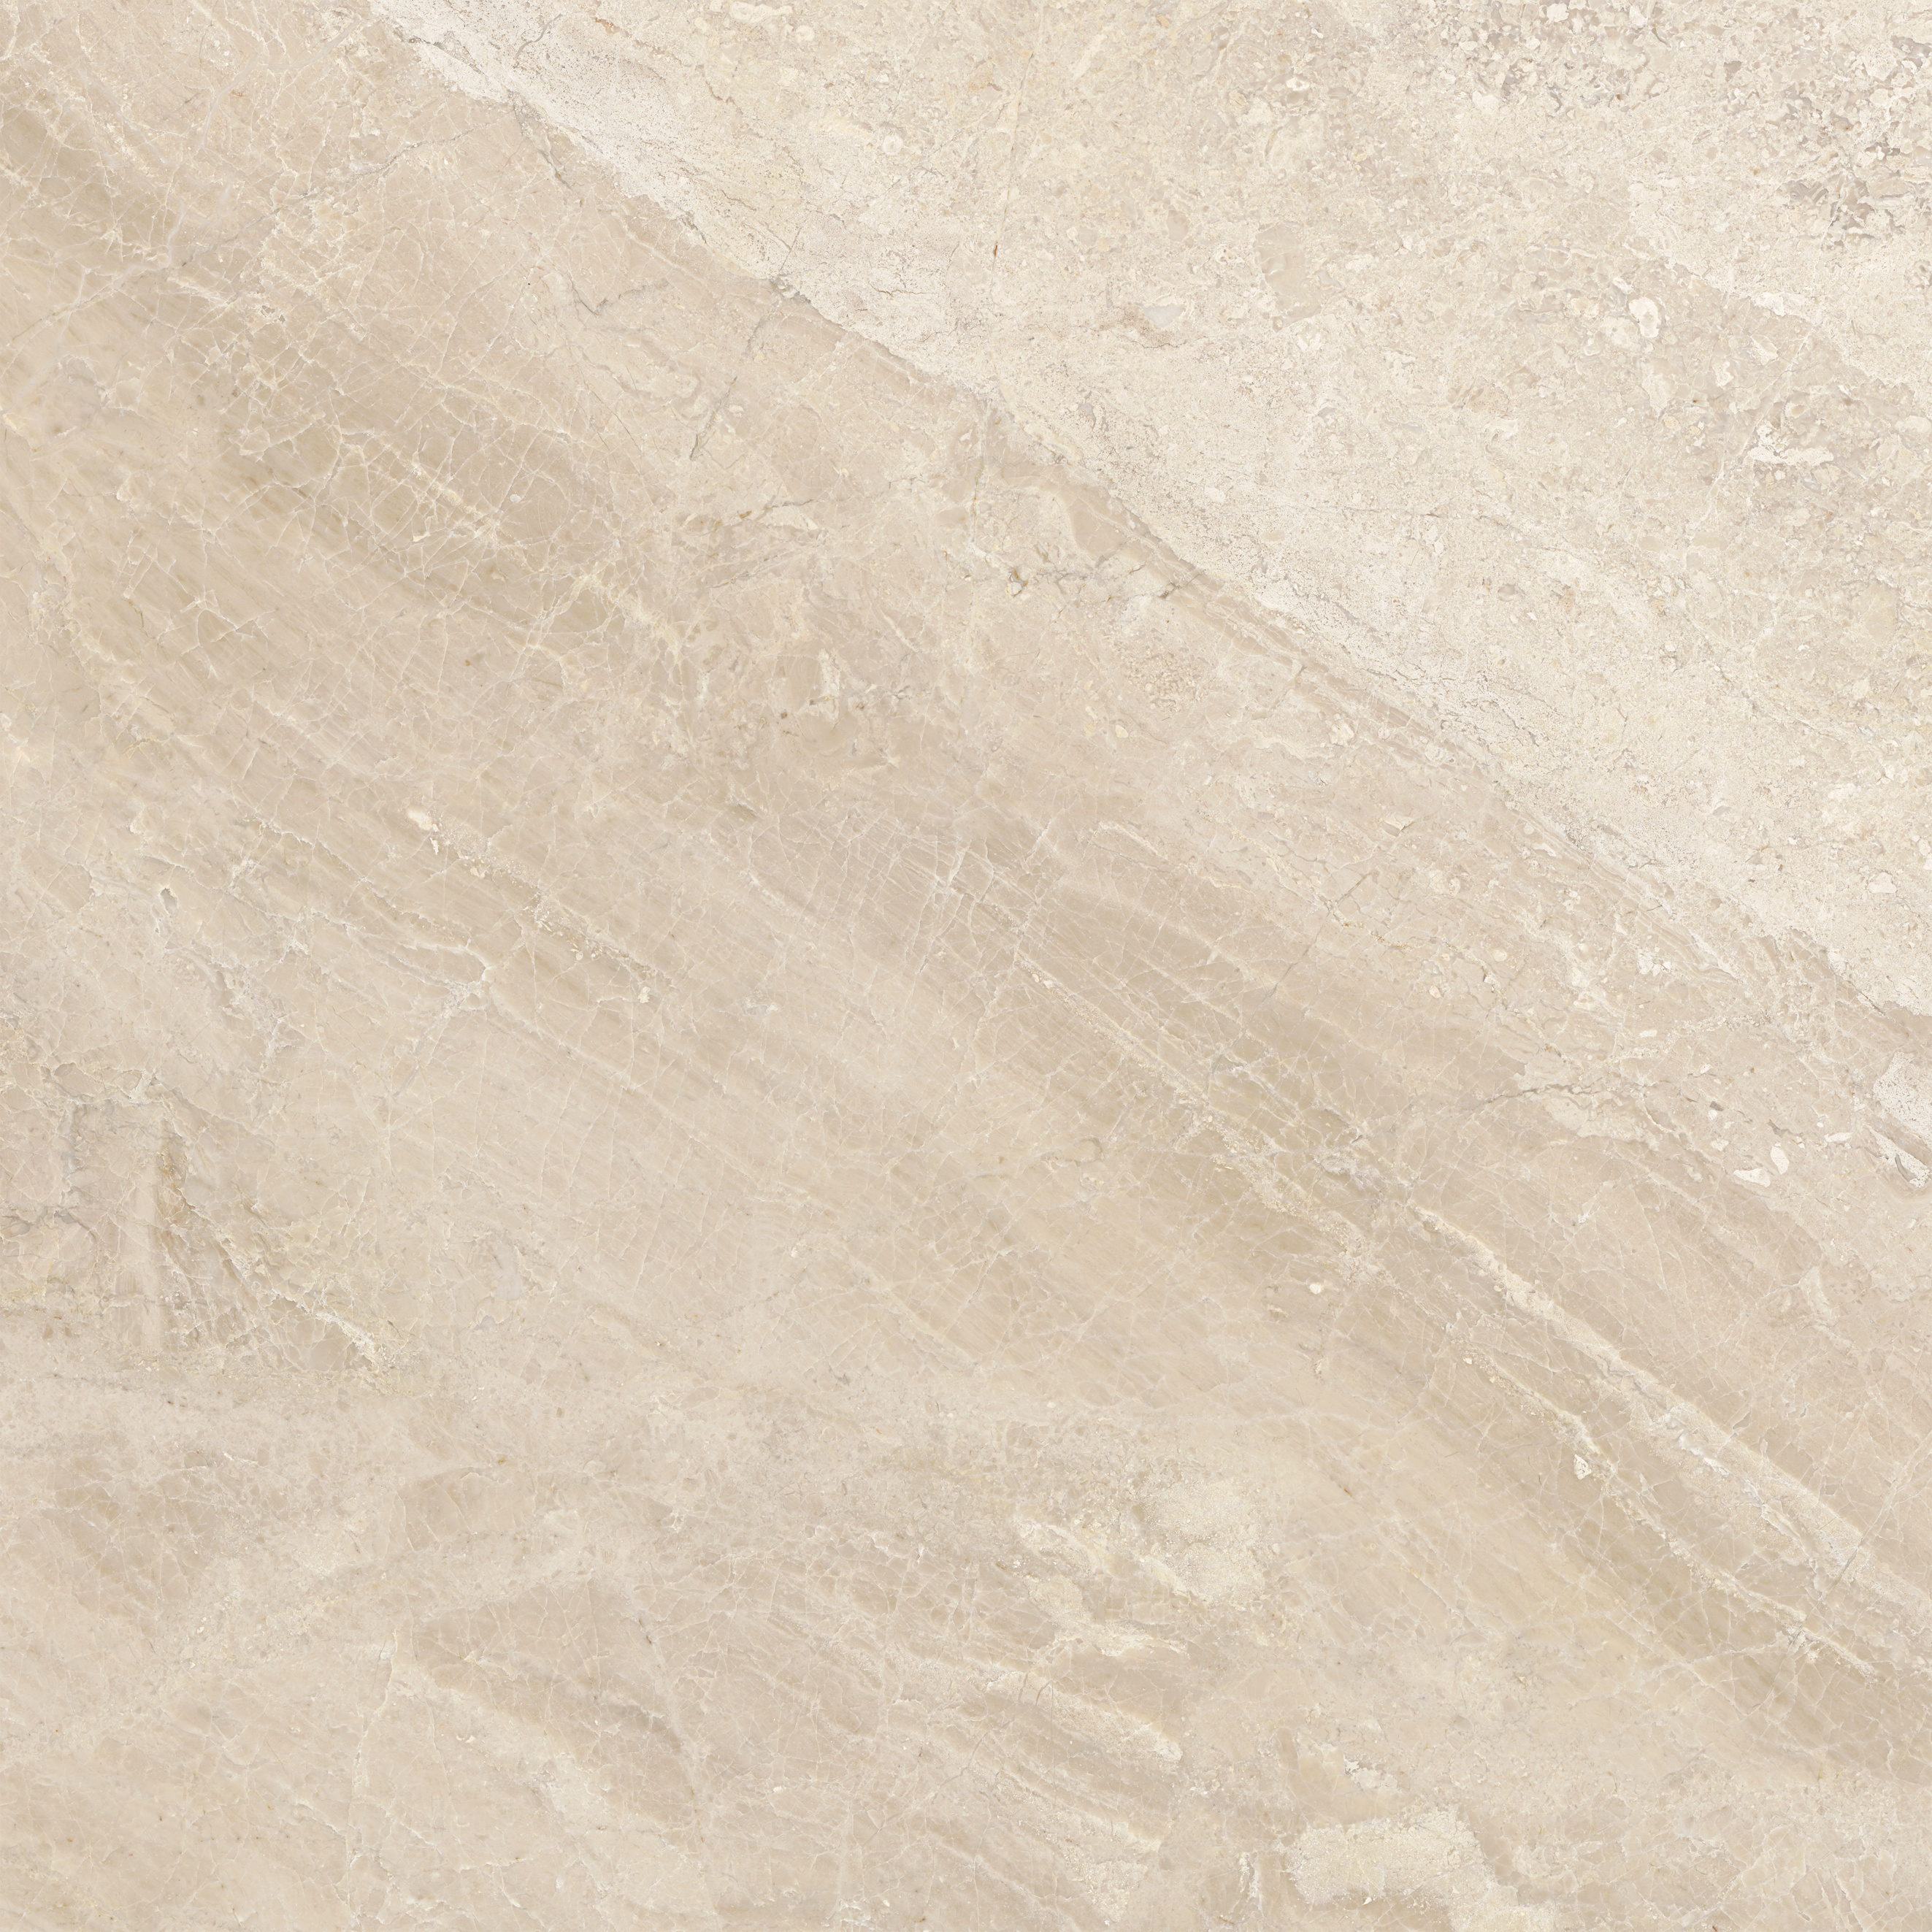 impero reale marble beige stone tile  sold by surface group